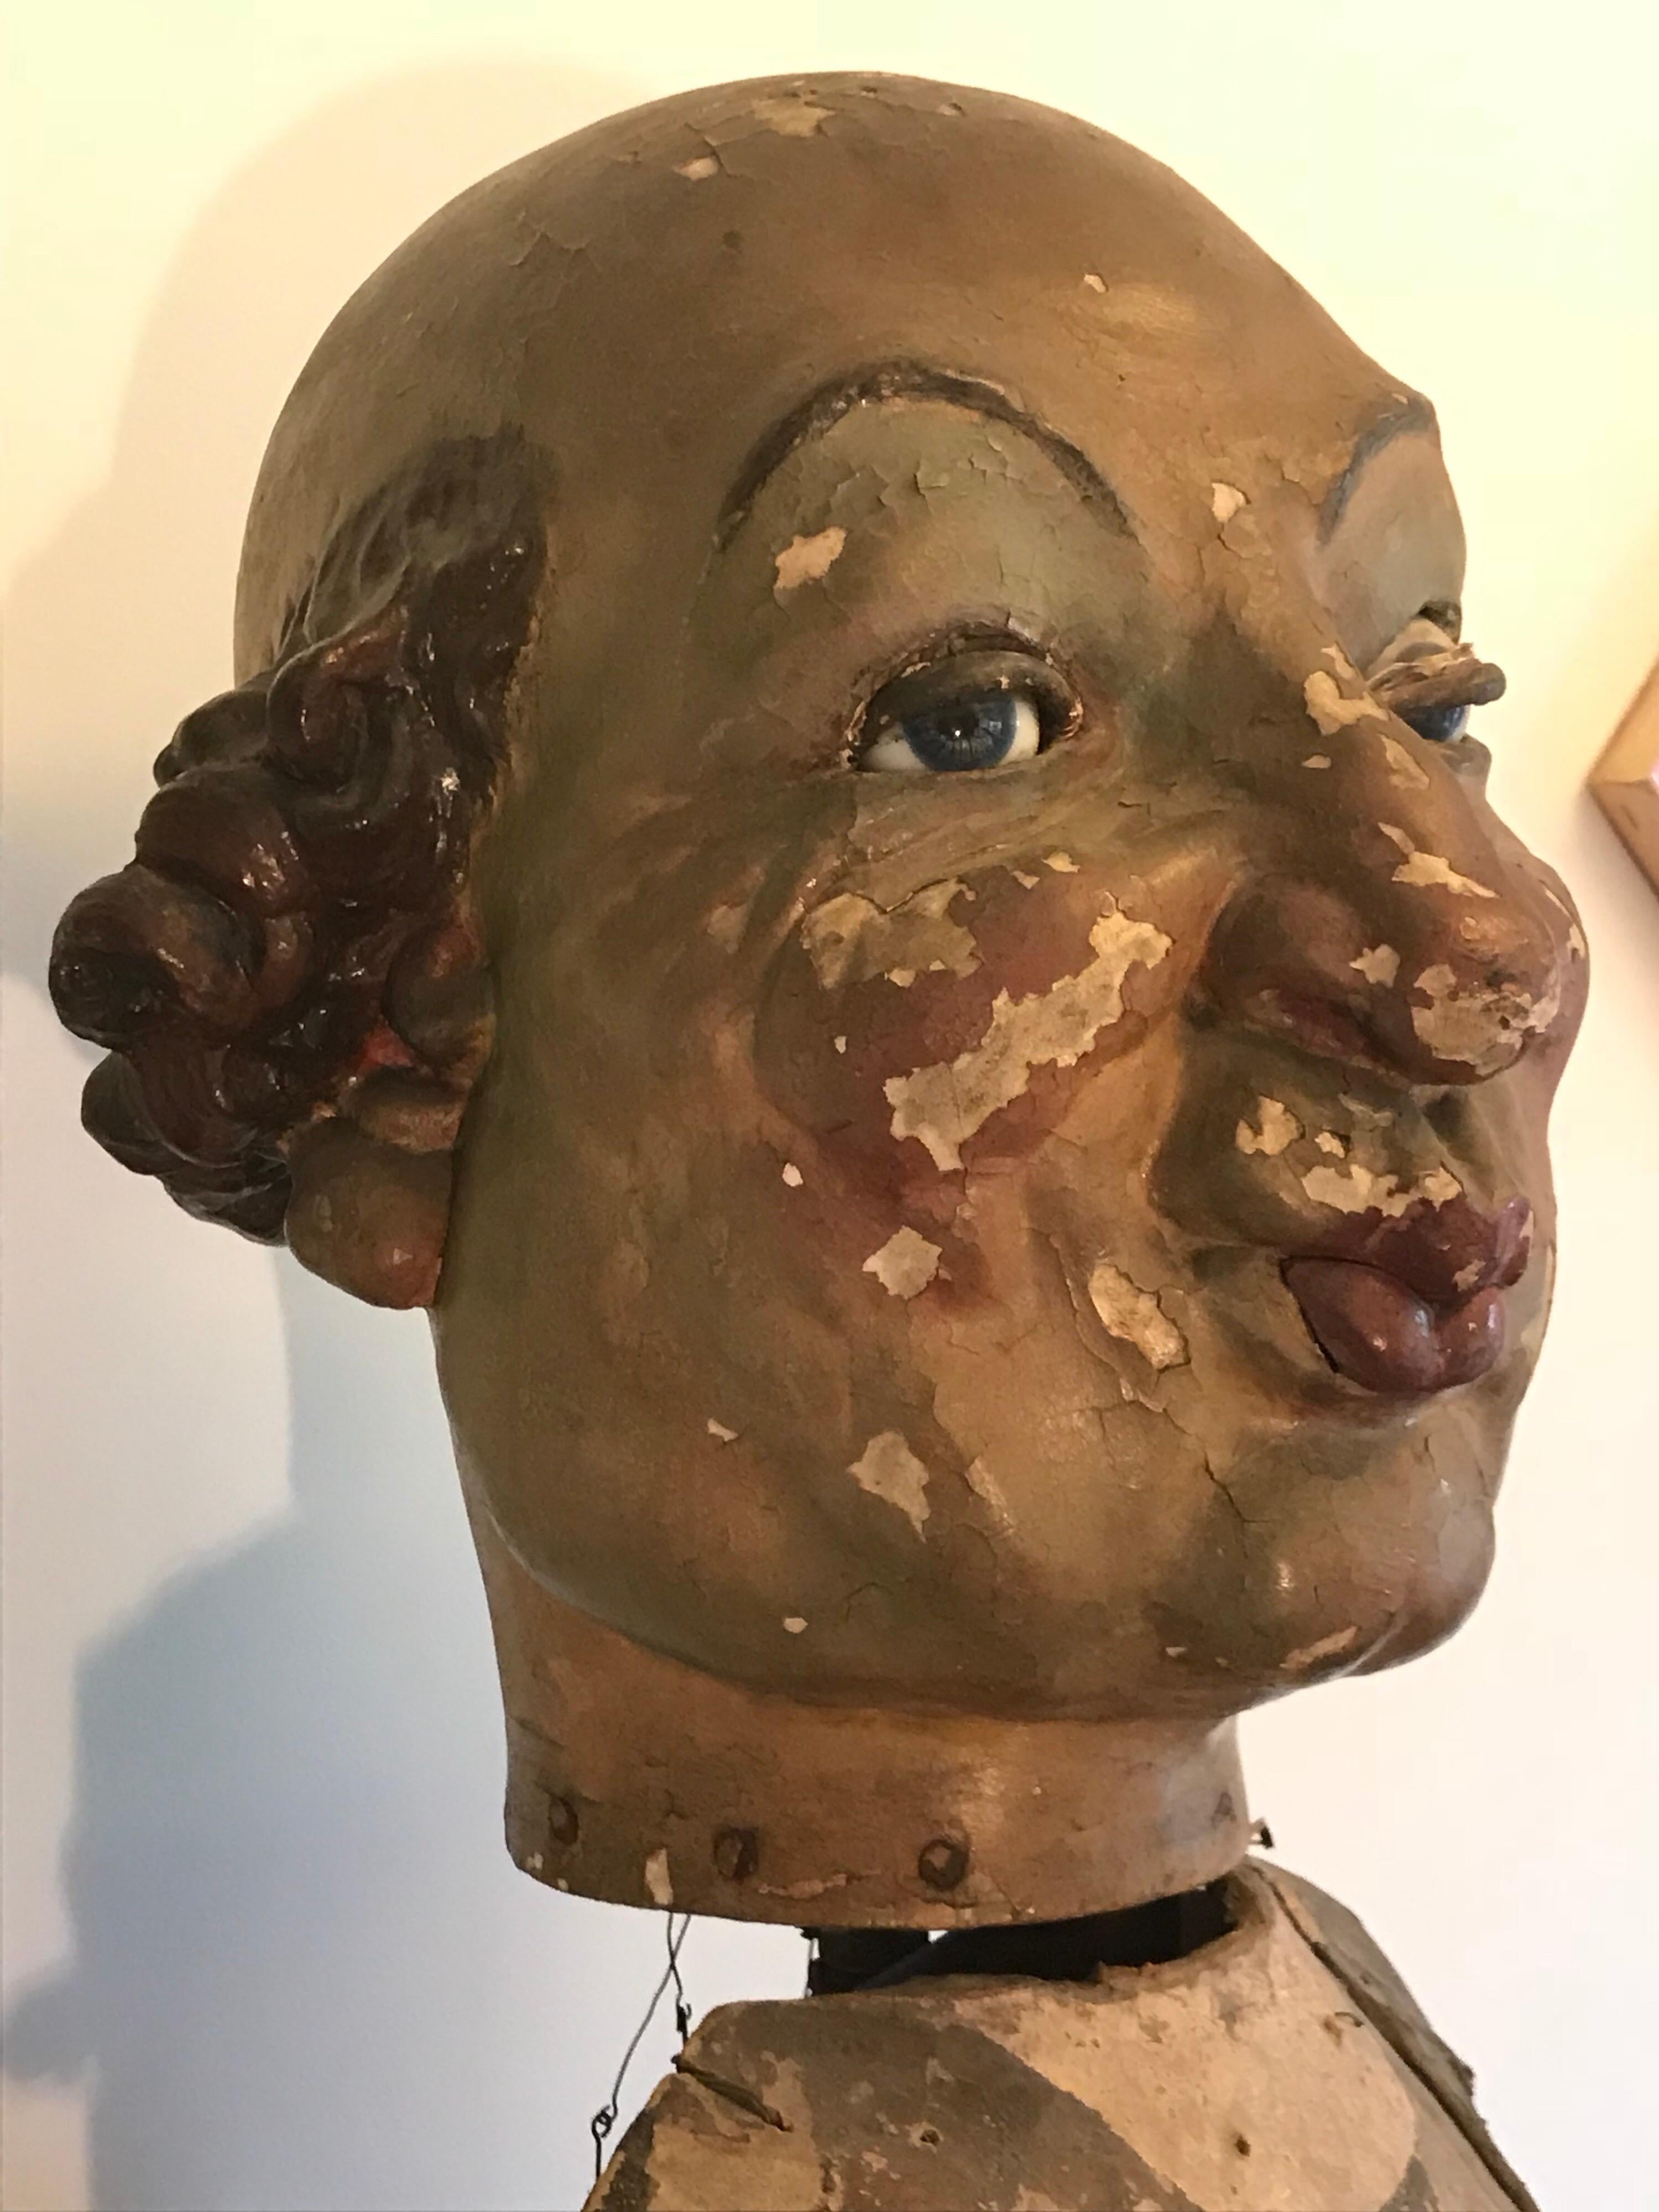 A fun piece. 
It's in the original condition showing ware and tare with patina and missing parts.
Nevertheless, it's great as a decorative art object.
The head is made of painted plaster with glass eyes, iron and wood with metal hardware with